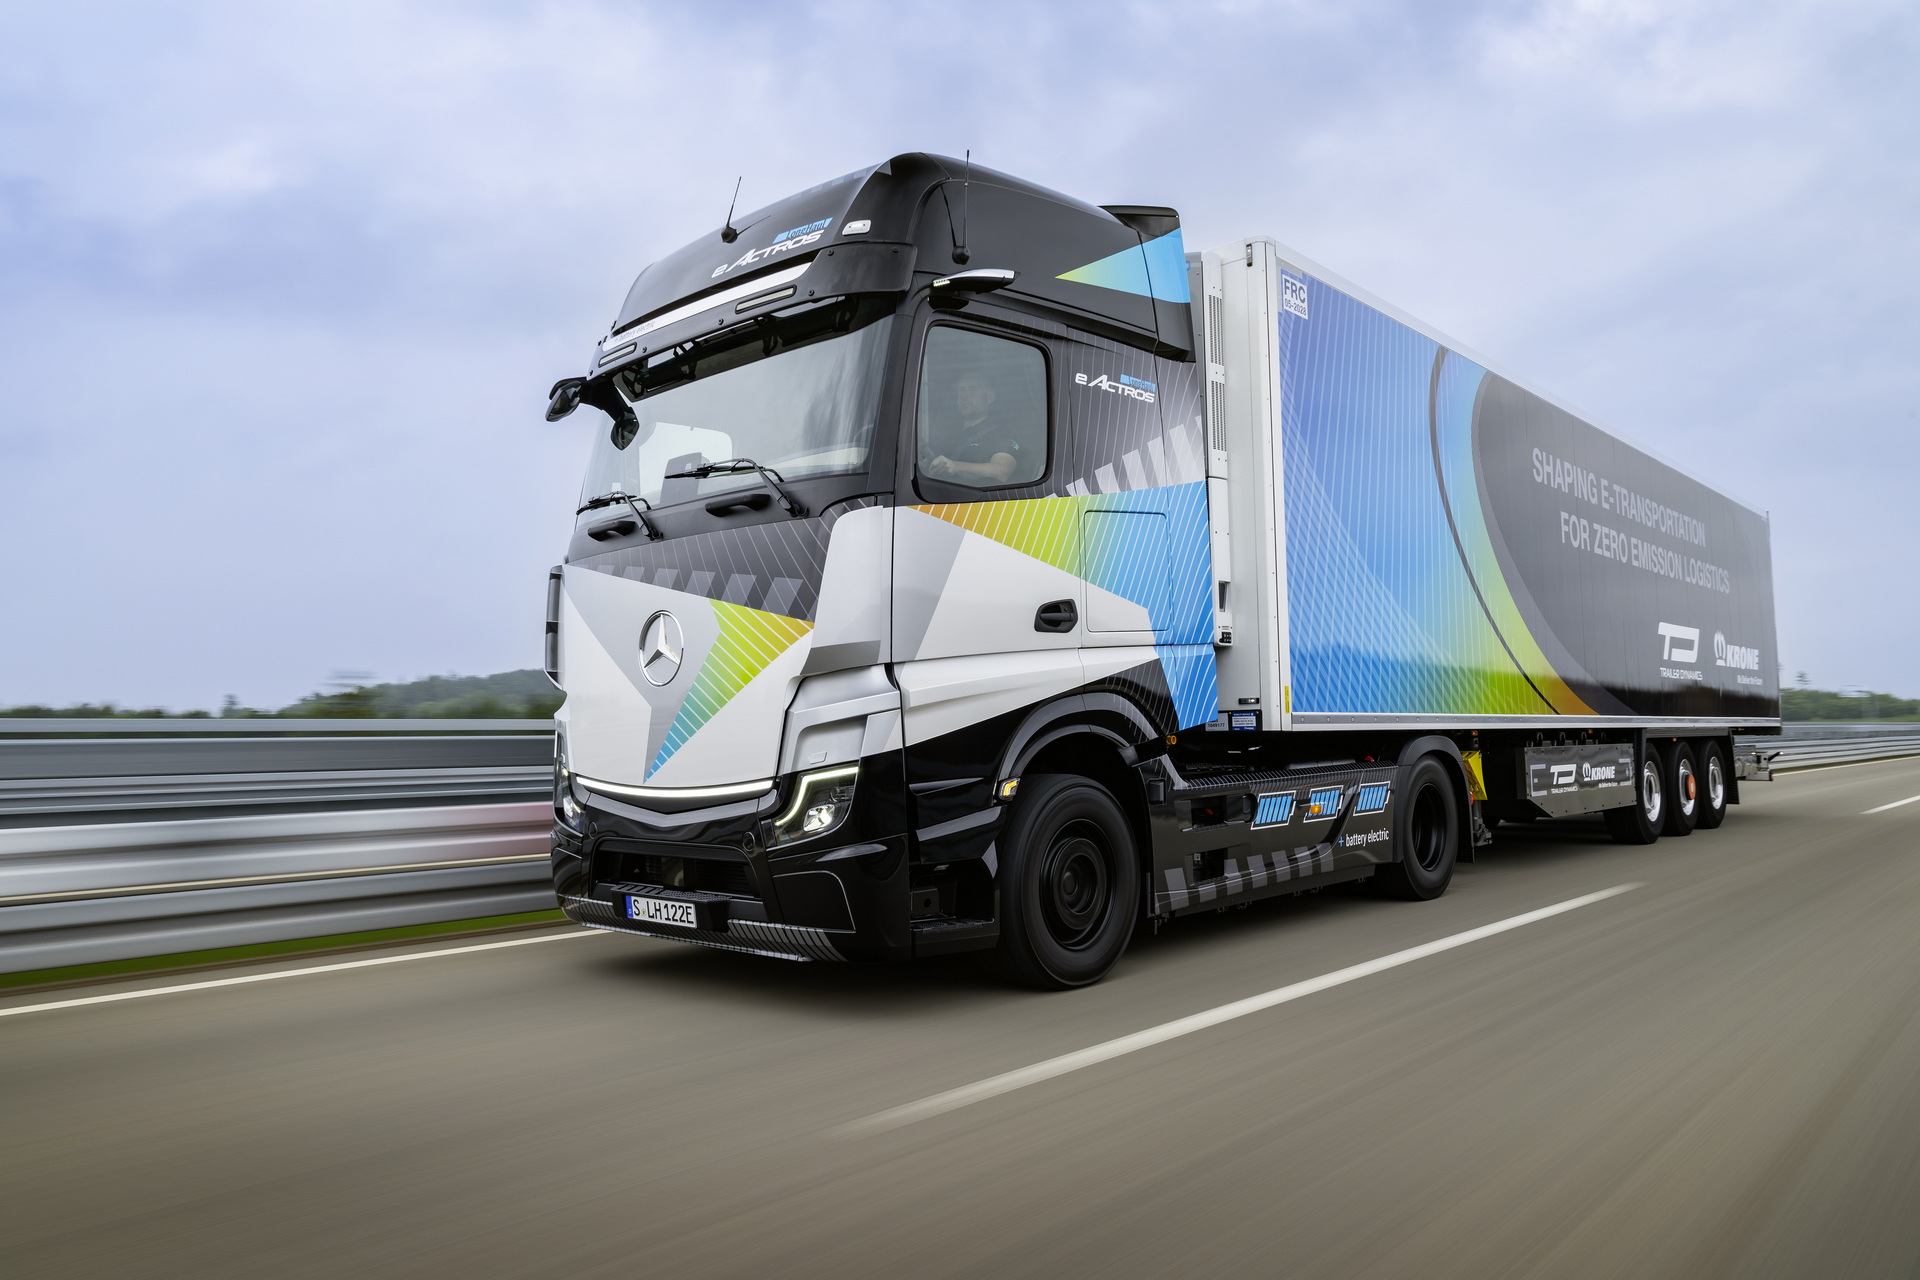 Mercedes introduces electric truck with 800 km range, 815 hp engine and 1.2 million km range